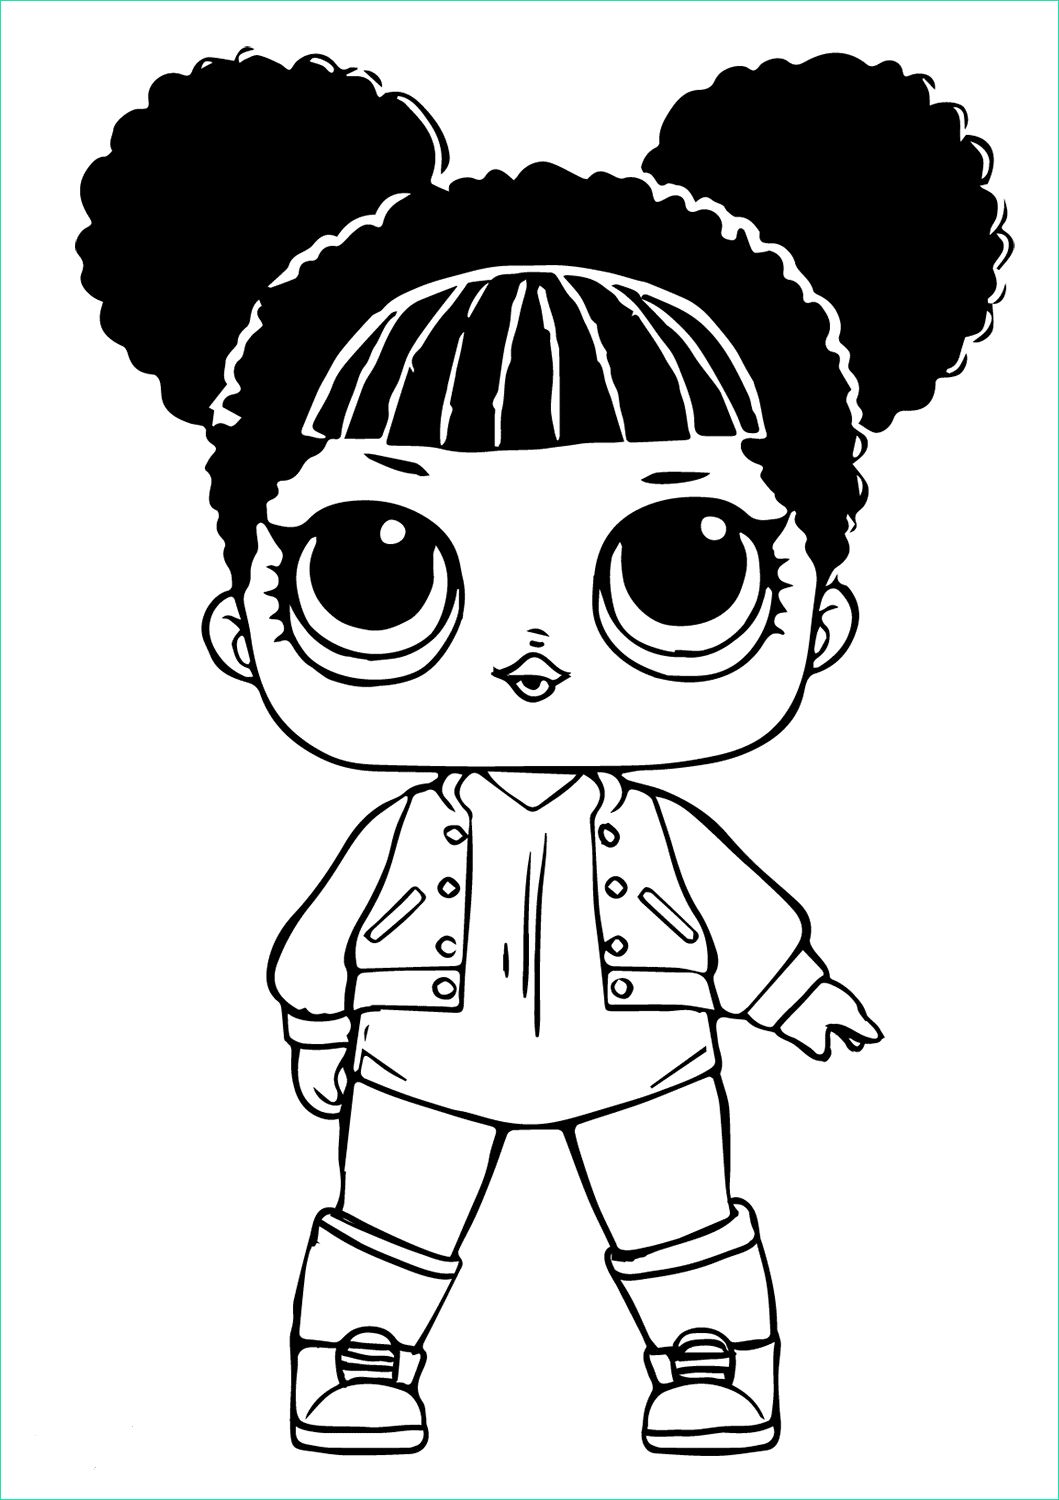 Lol Dessin Cool Photographie 40 Free Printable Lol Surprise Dolls Coloring Pages